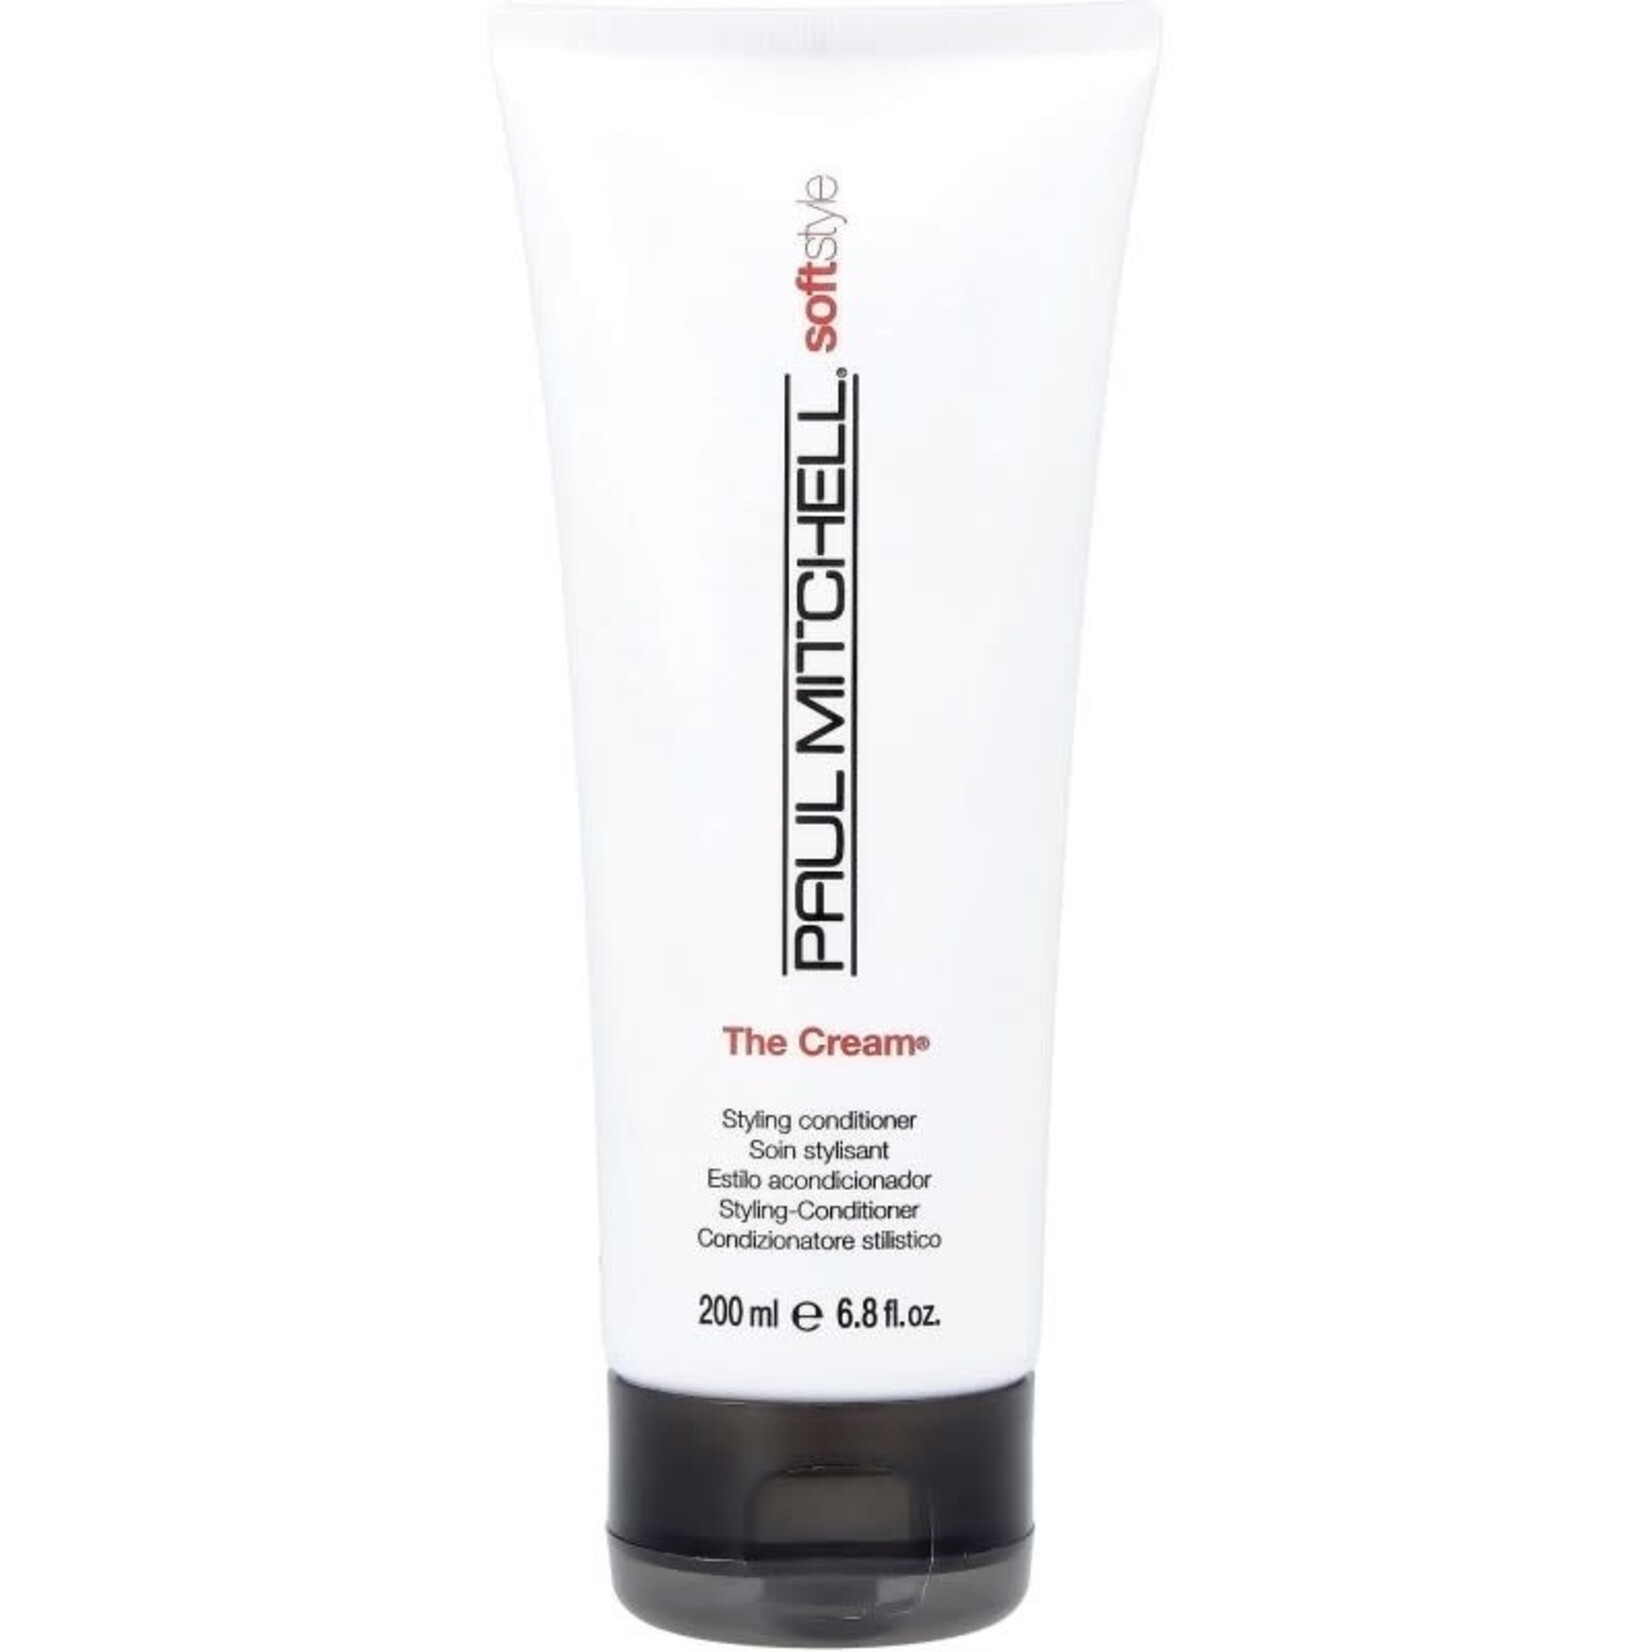 Paul Mitchell Paul Mitchell - Soft Style - The Cream - Styling Conditioner 200ml